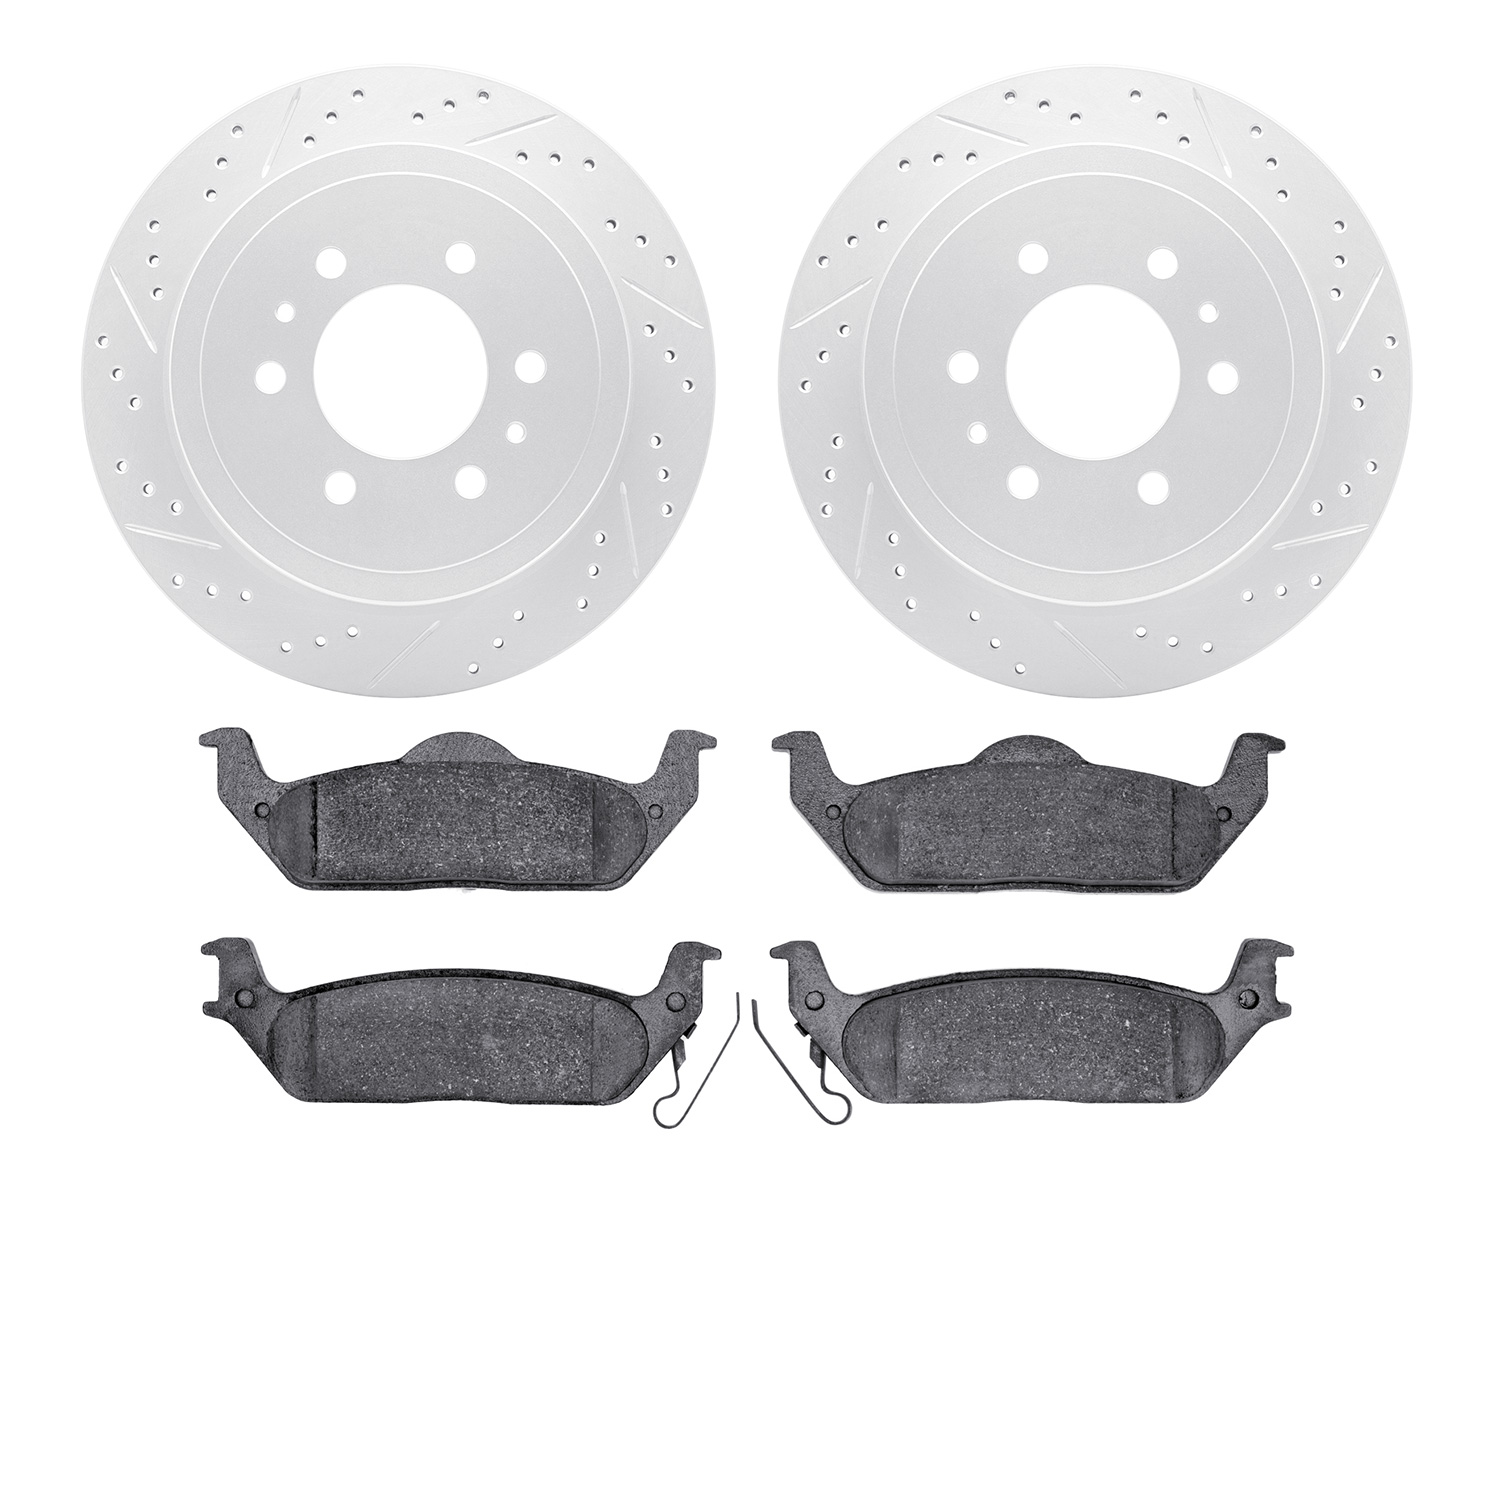 2202-99136 Geoperformance Drilled/Slotted Rotors w/Heavy-Duty Pads Kit, 2004-2011 Ford/Lincoln/Mercury/Mazda, Position: Rear